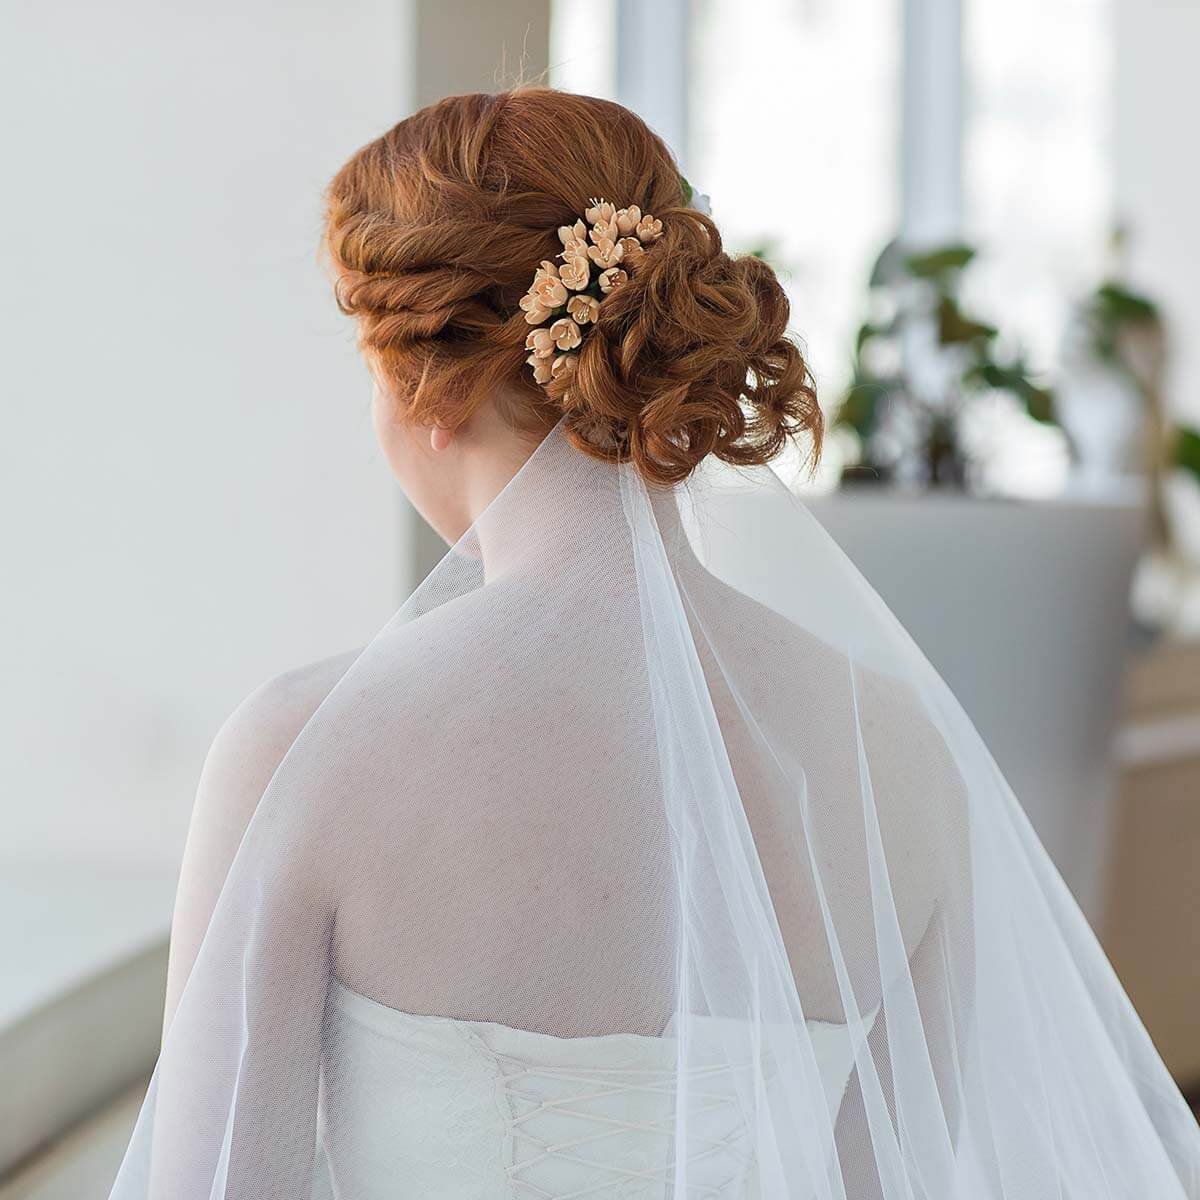 Red hair bride with chic updo